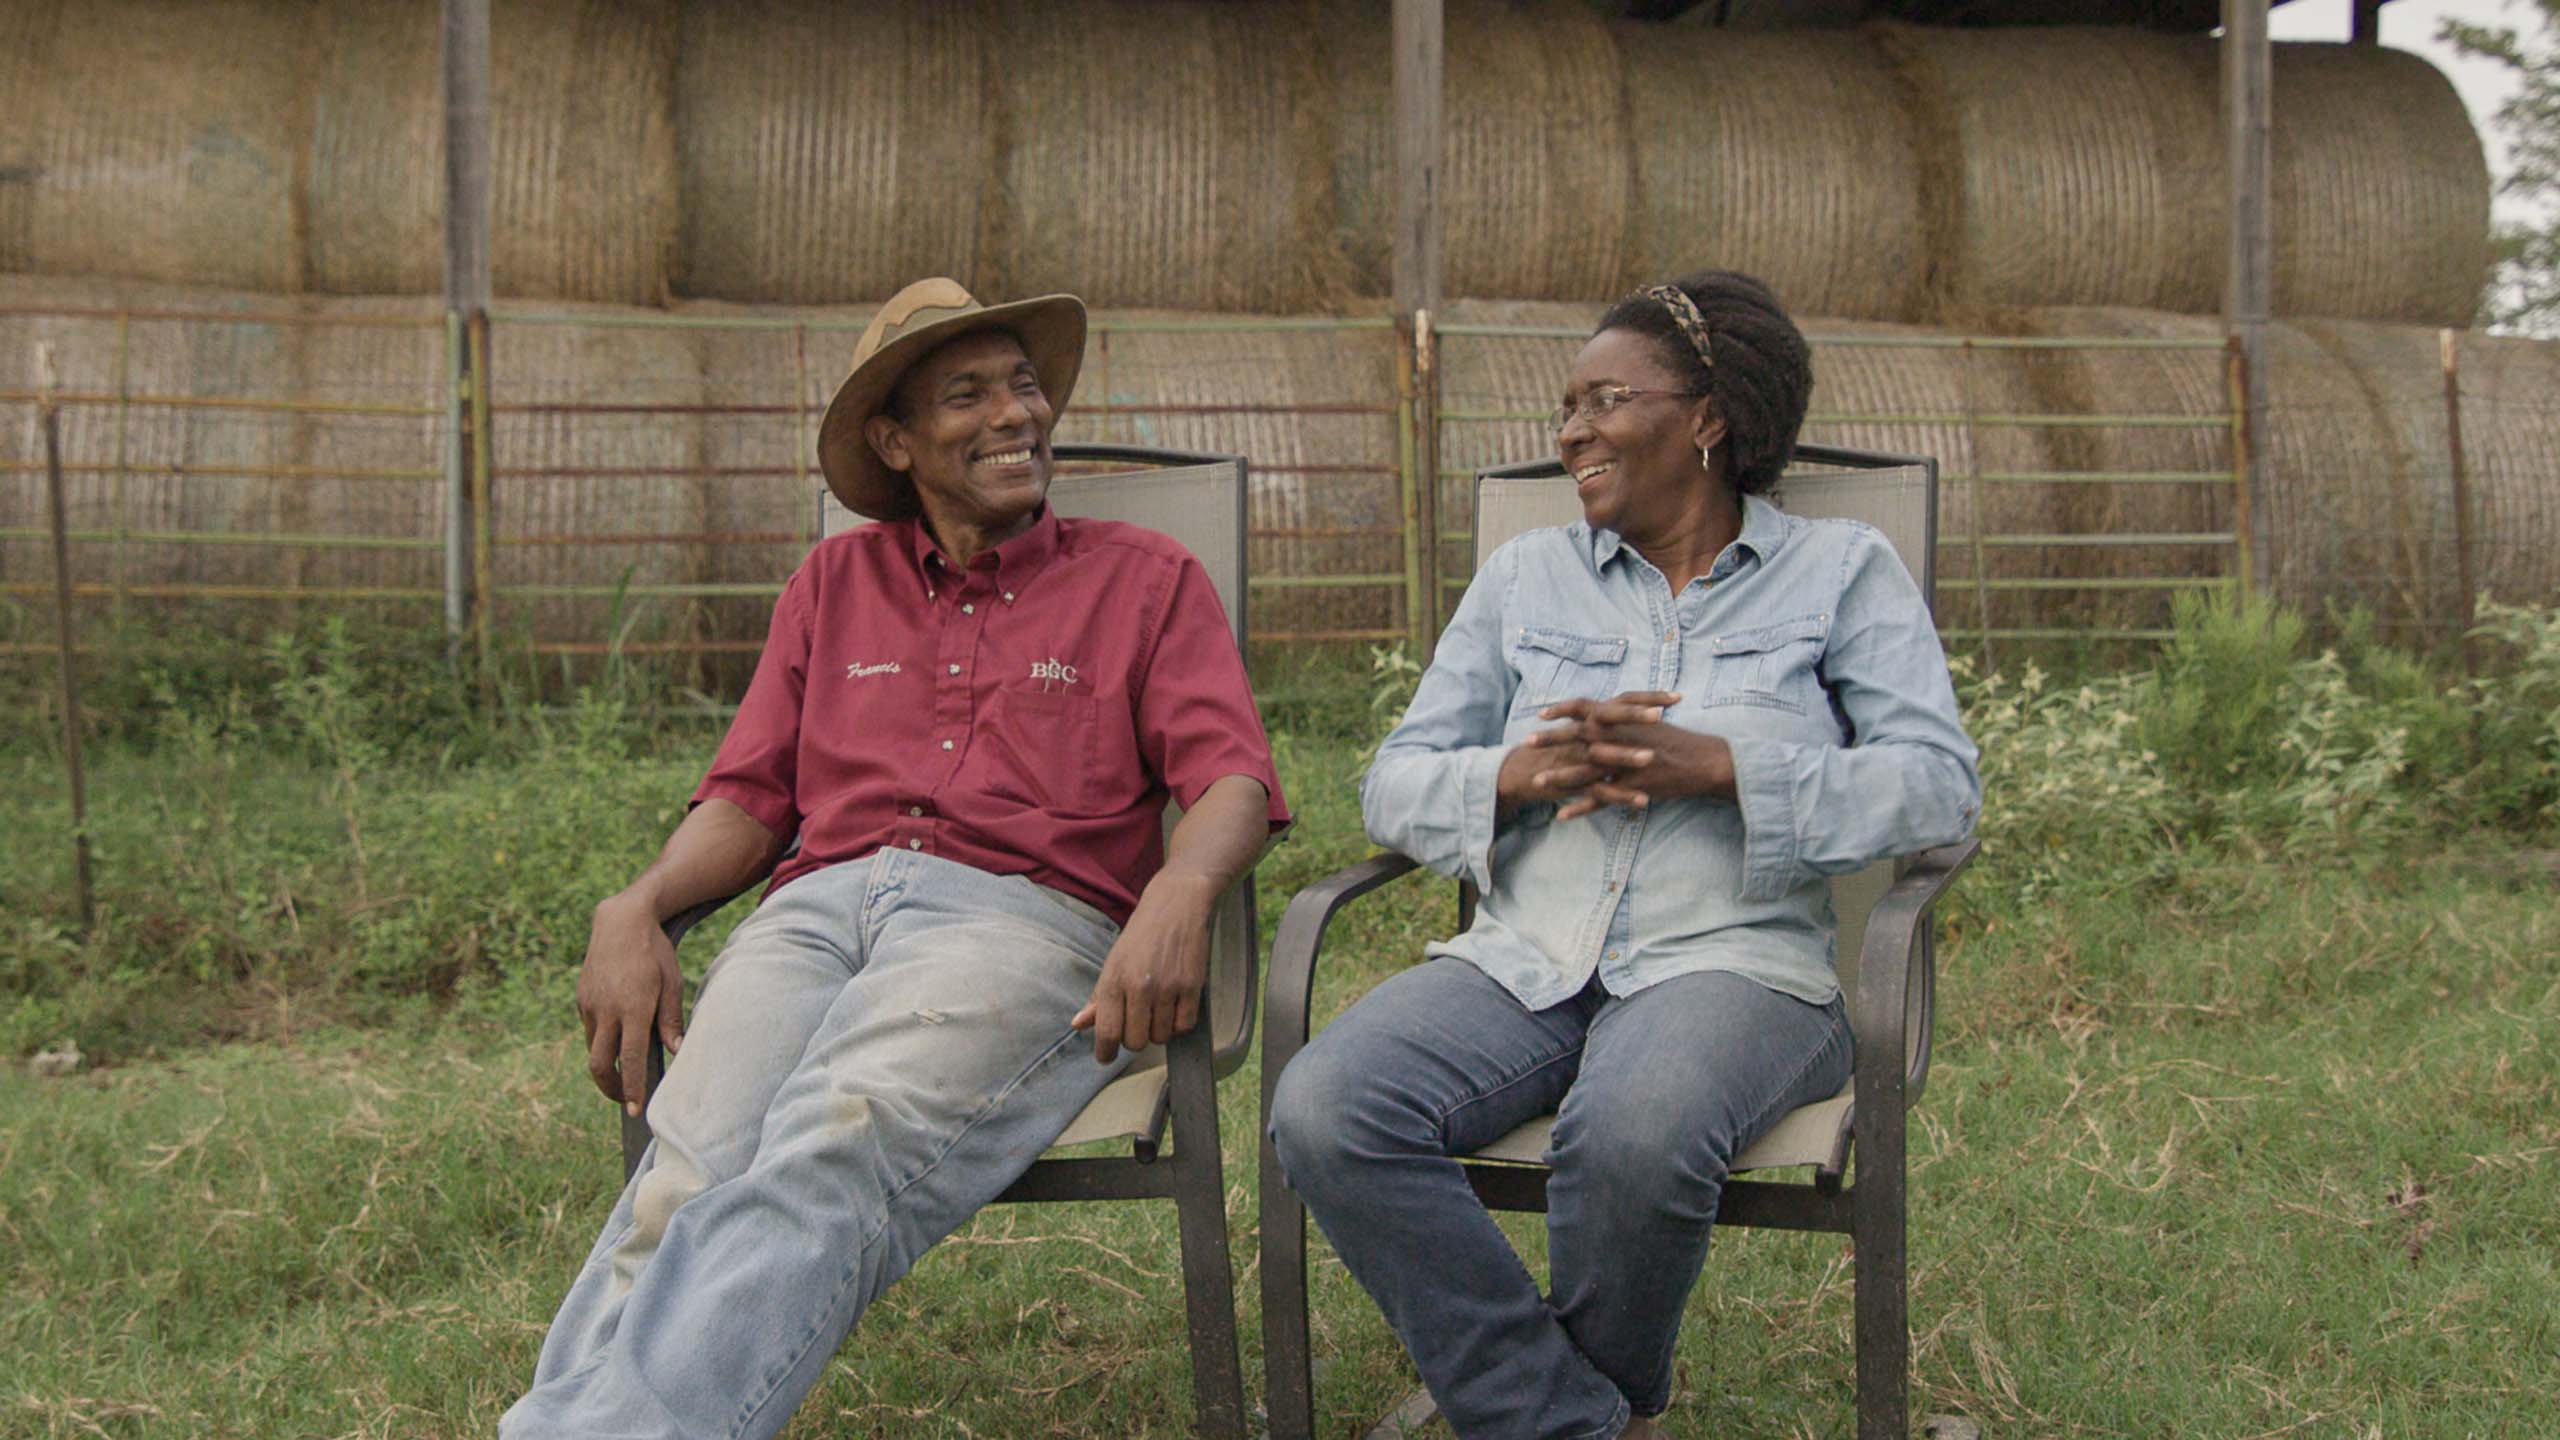 Husband and wife Francis and Cynthia Matlock share a laugh together in front of a haystack on their property. September 2020